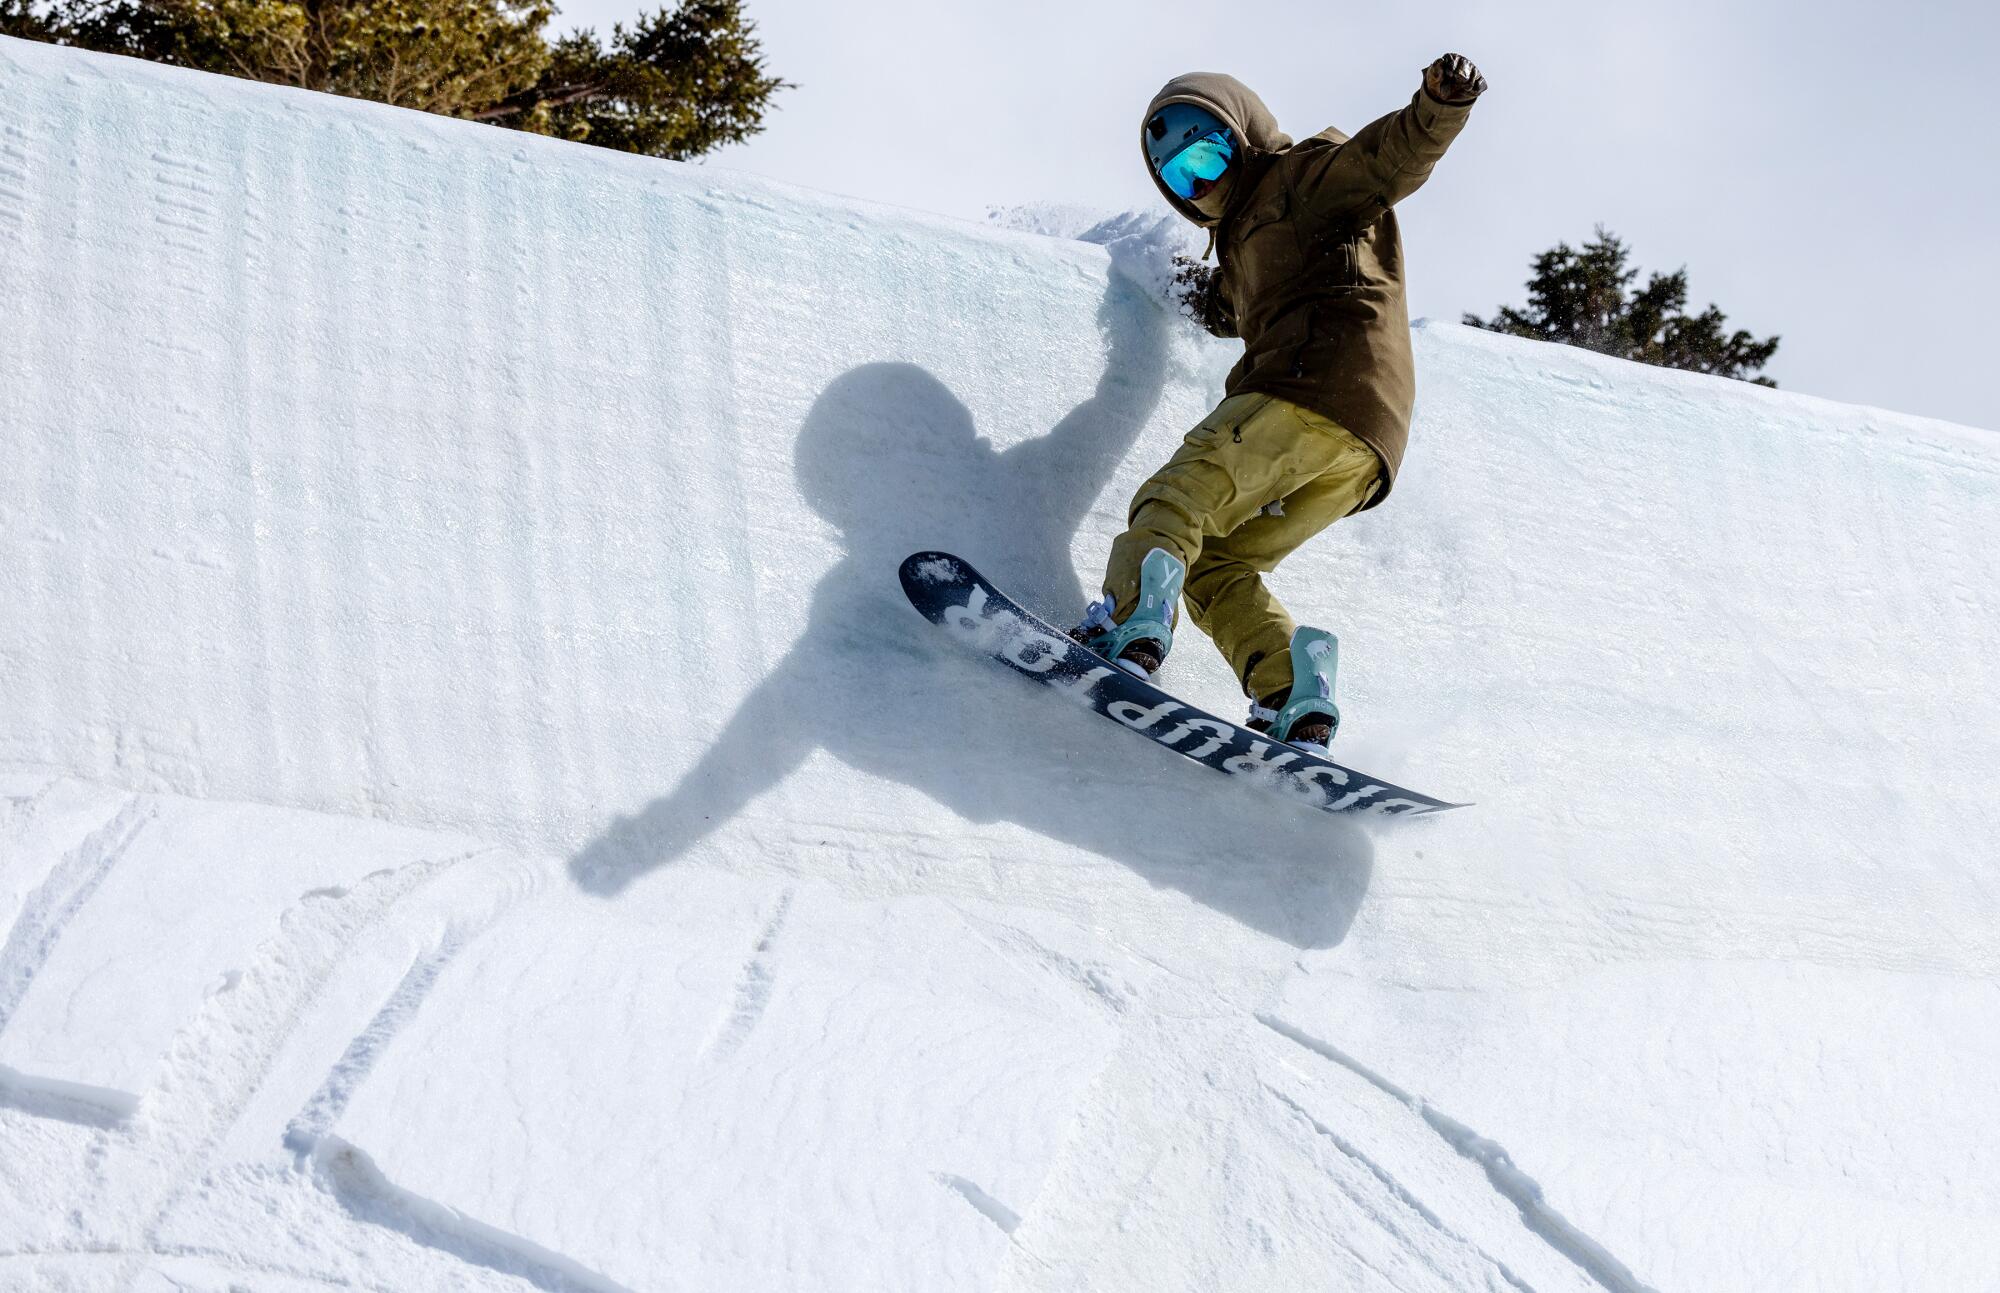  A snowboarder scrapes the top edge of a halfpipe.